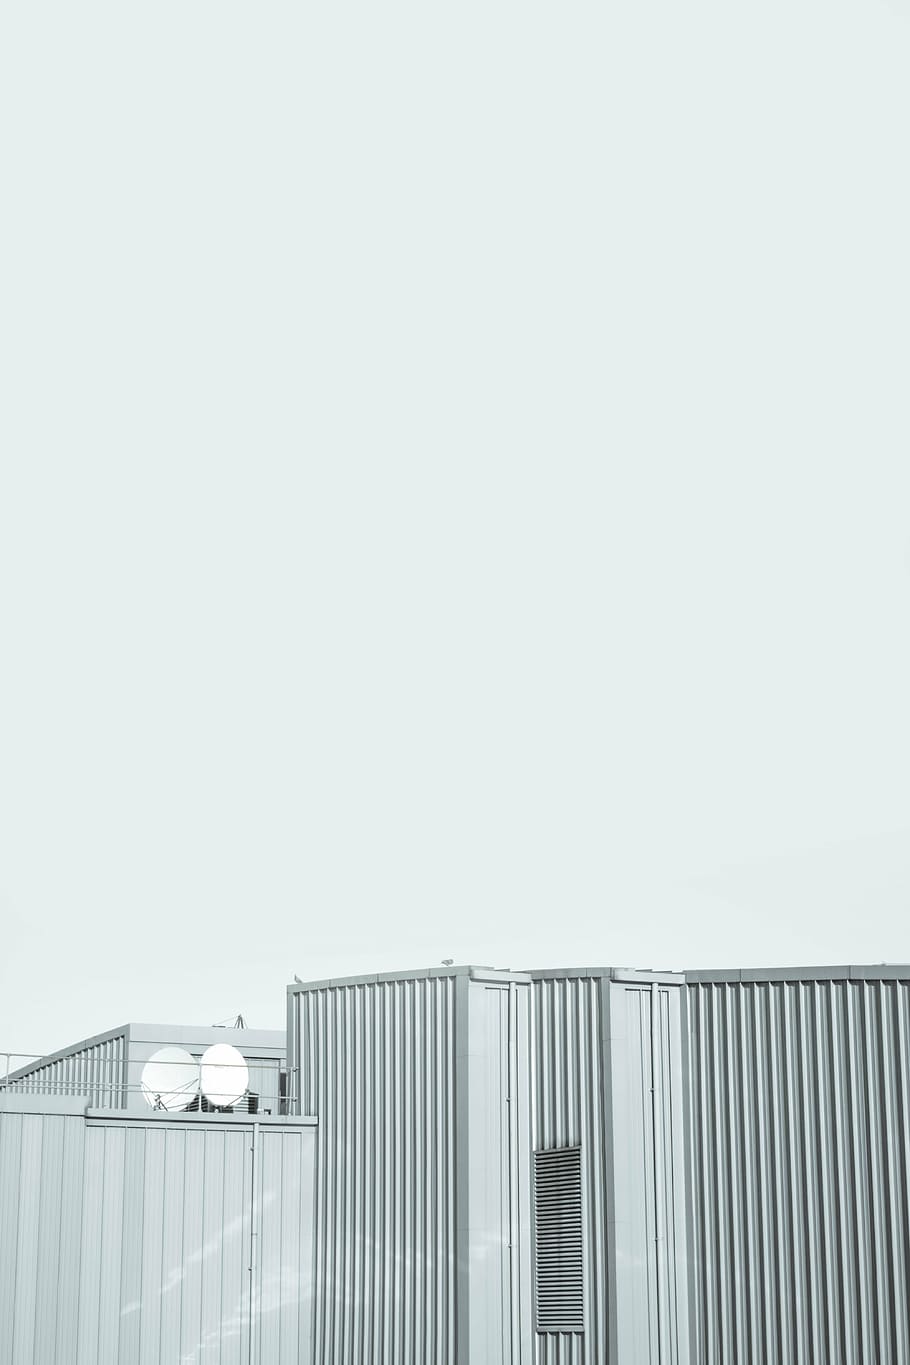 photography, white, concrete, building, daytime, gray, metal, lot, architecture, infrastructure